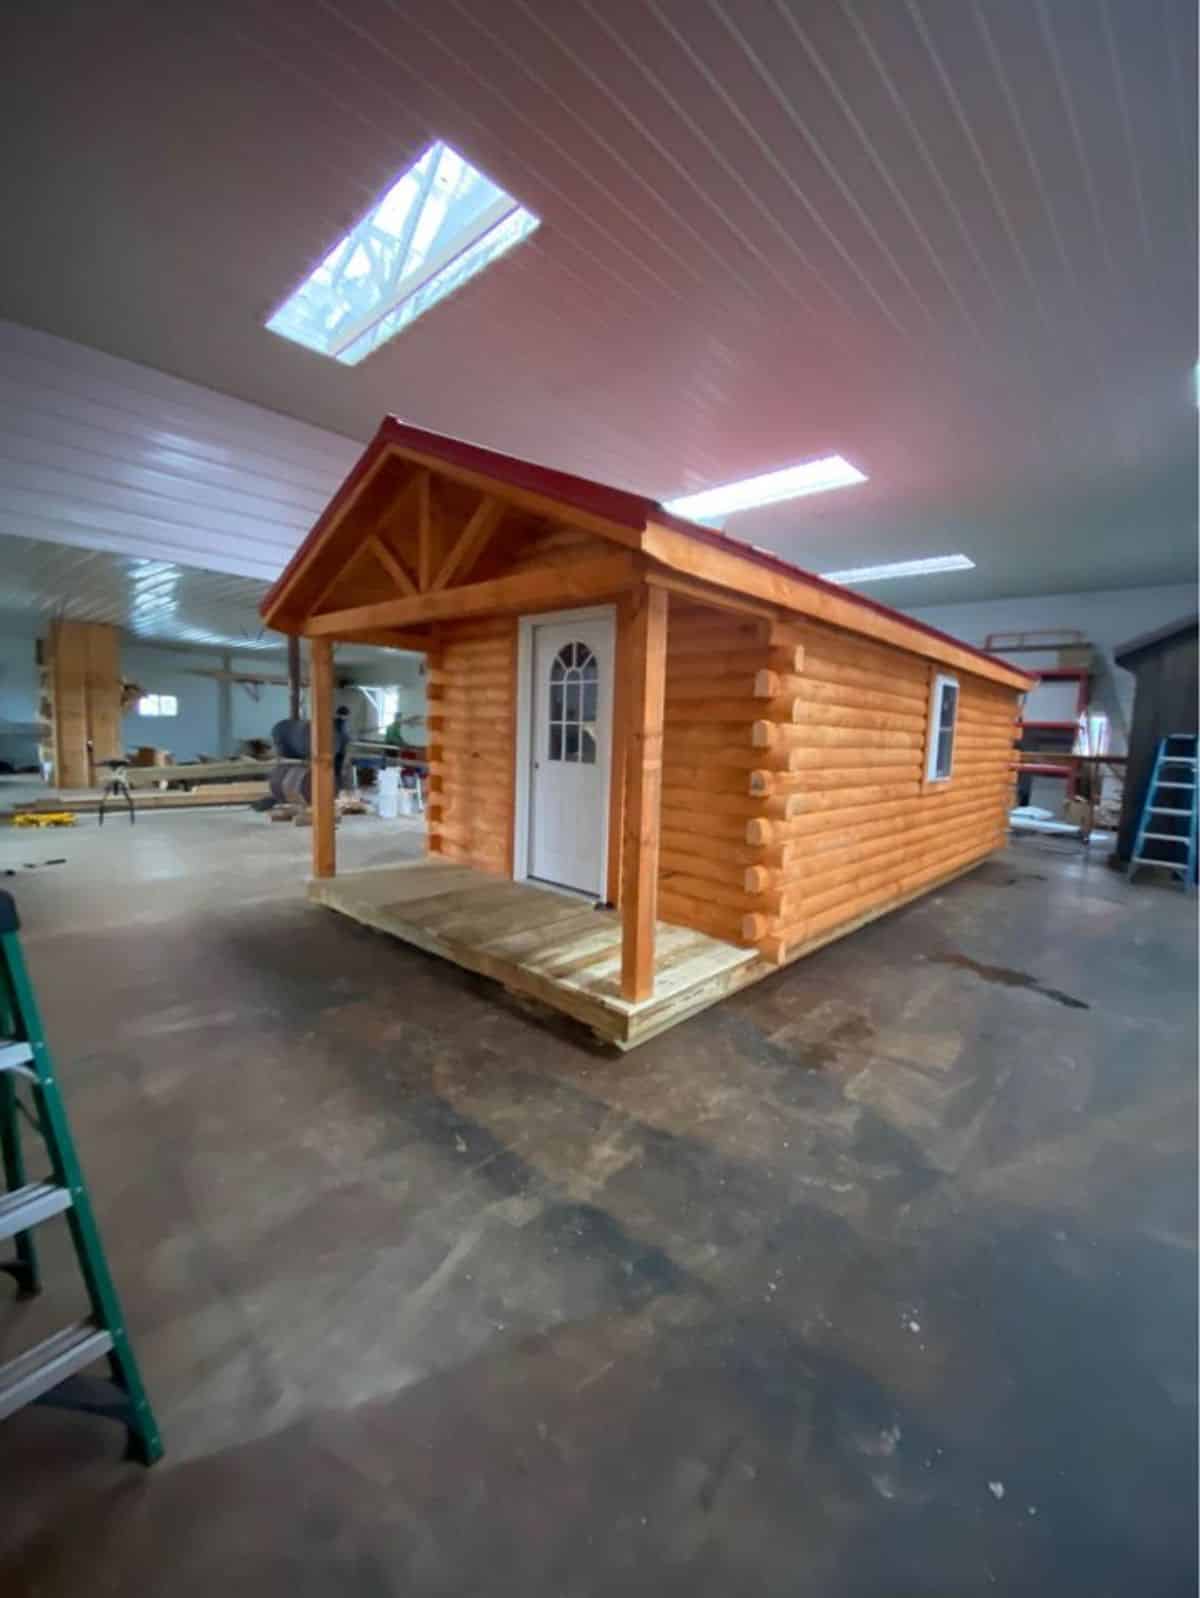 Wooden exterior of the tiny home from outside